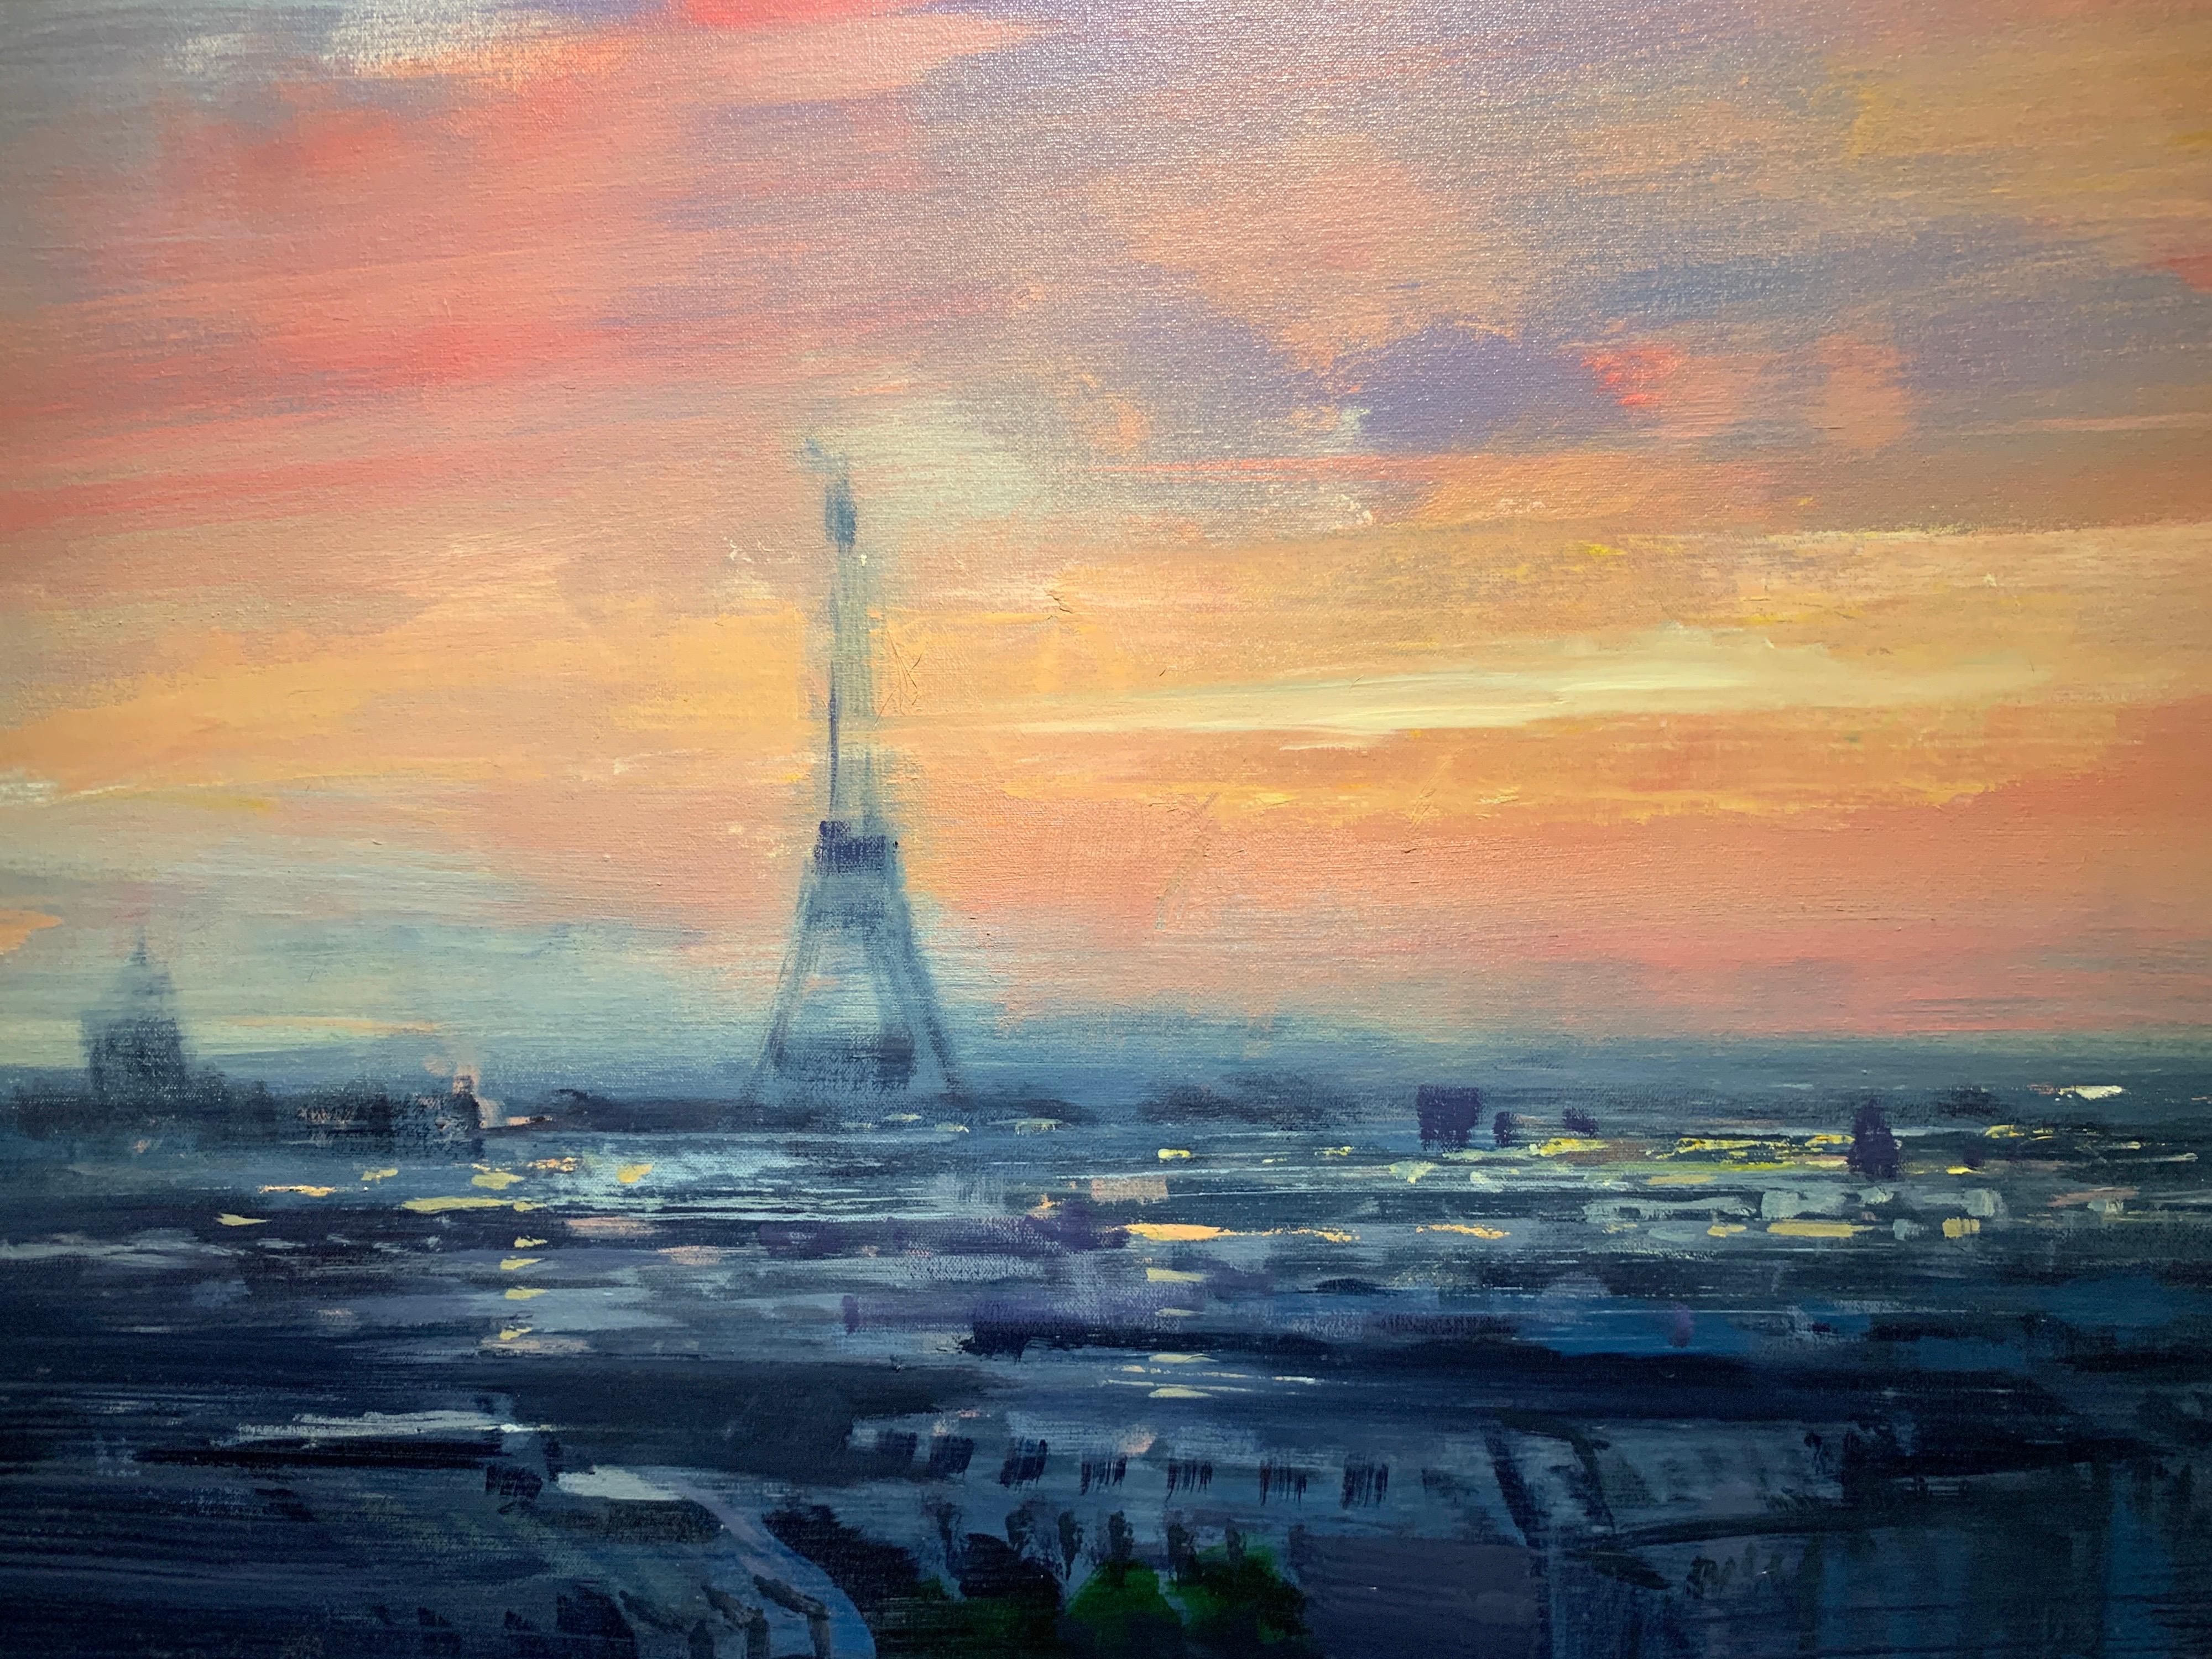 'Morning Light in Paris' is a large contemporary oil on canvas landscape painting created by American artist Craig Mooney in 2021. Featuring an exquisite palette mostly made of pink, blue and purple tones, accented with touches of orange, the